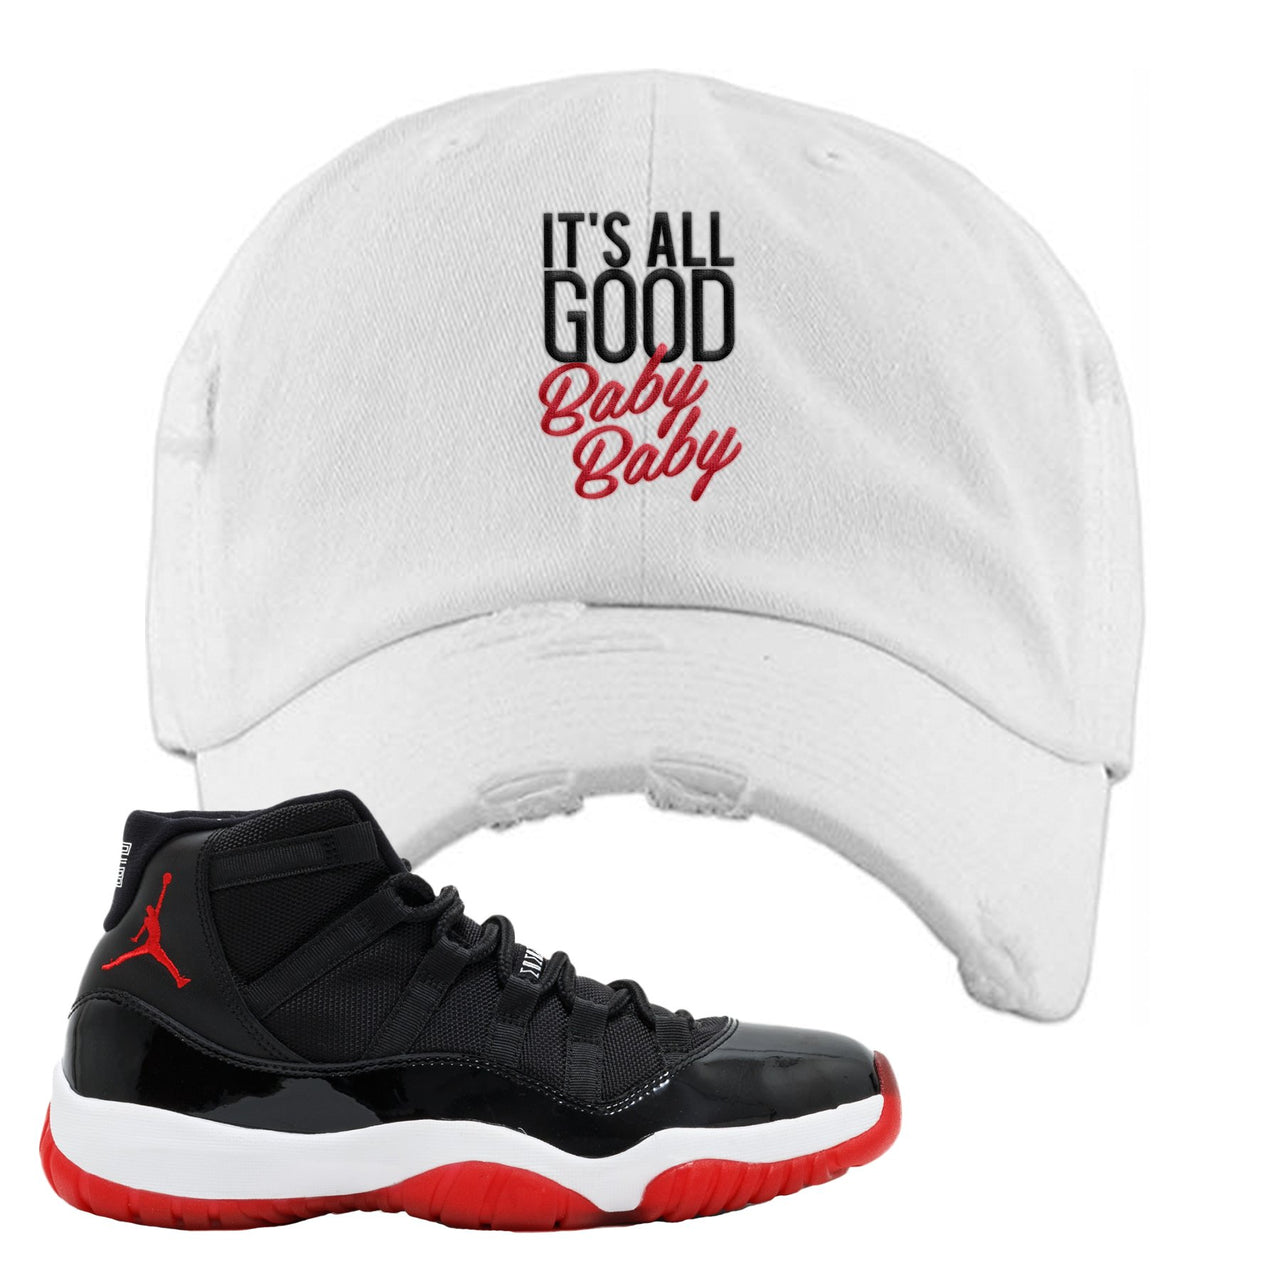 Jordan 11 Bred It's All Good Baby Baby White Sneaker Hook Up Distressed Dad Hat